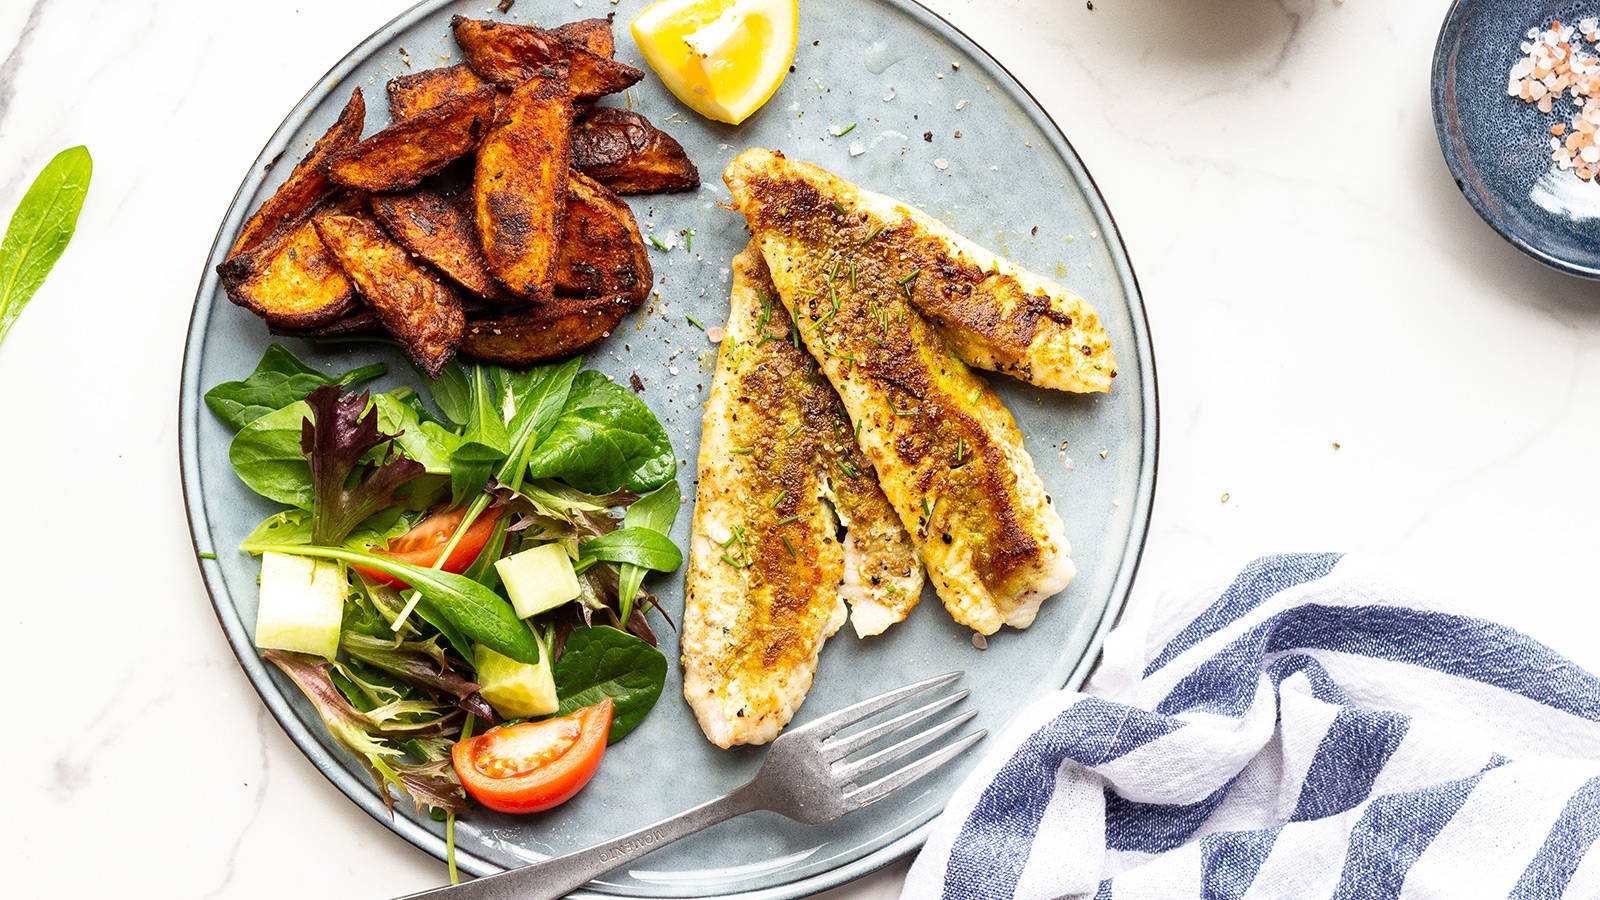 Gourmend recipe for low fodmap golden cumin fish with paprika spiced wedges